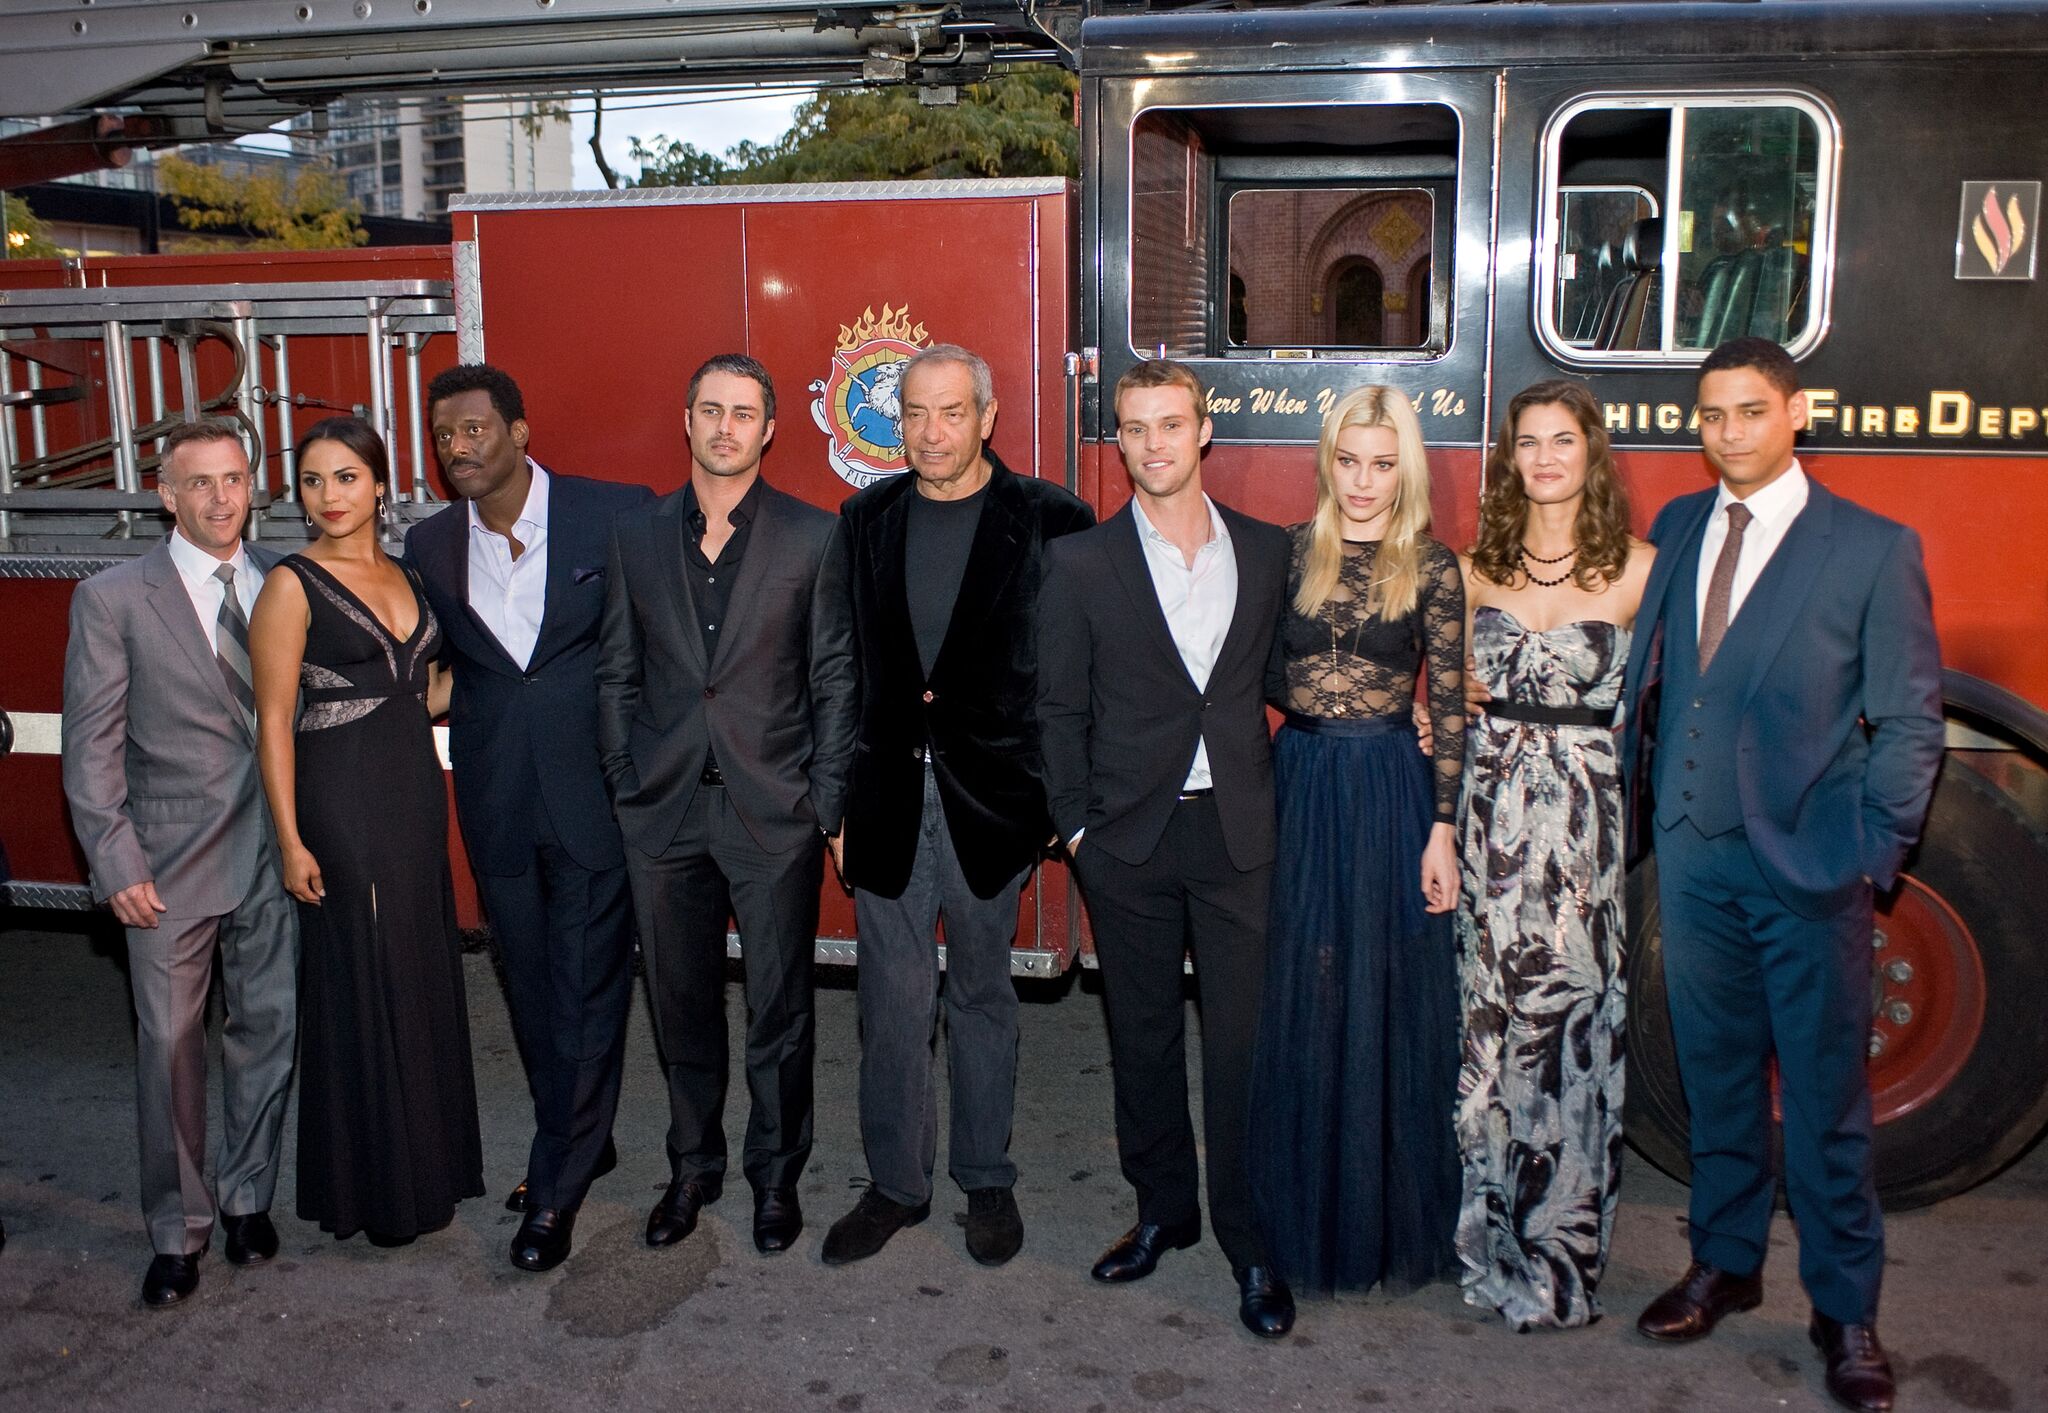 The cast and crew of NBC's "Chicago Fire" arrives at the premiere at the Chicago History Museum | Photo: Getty Images